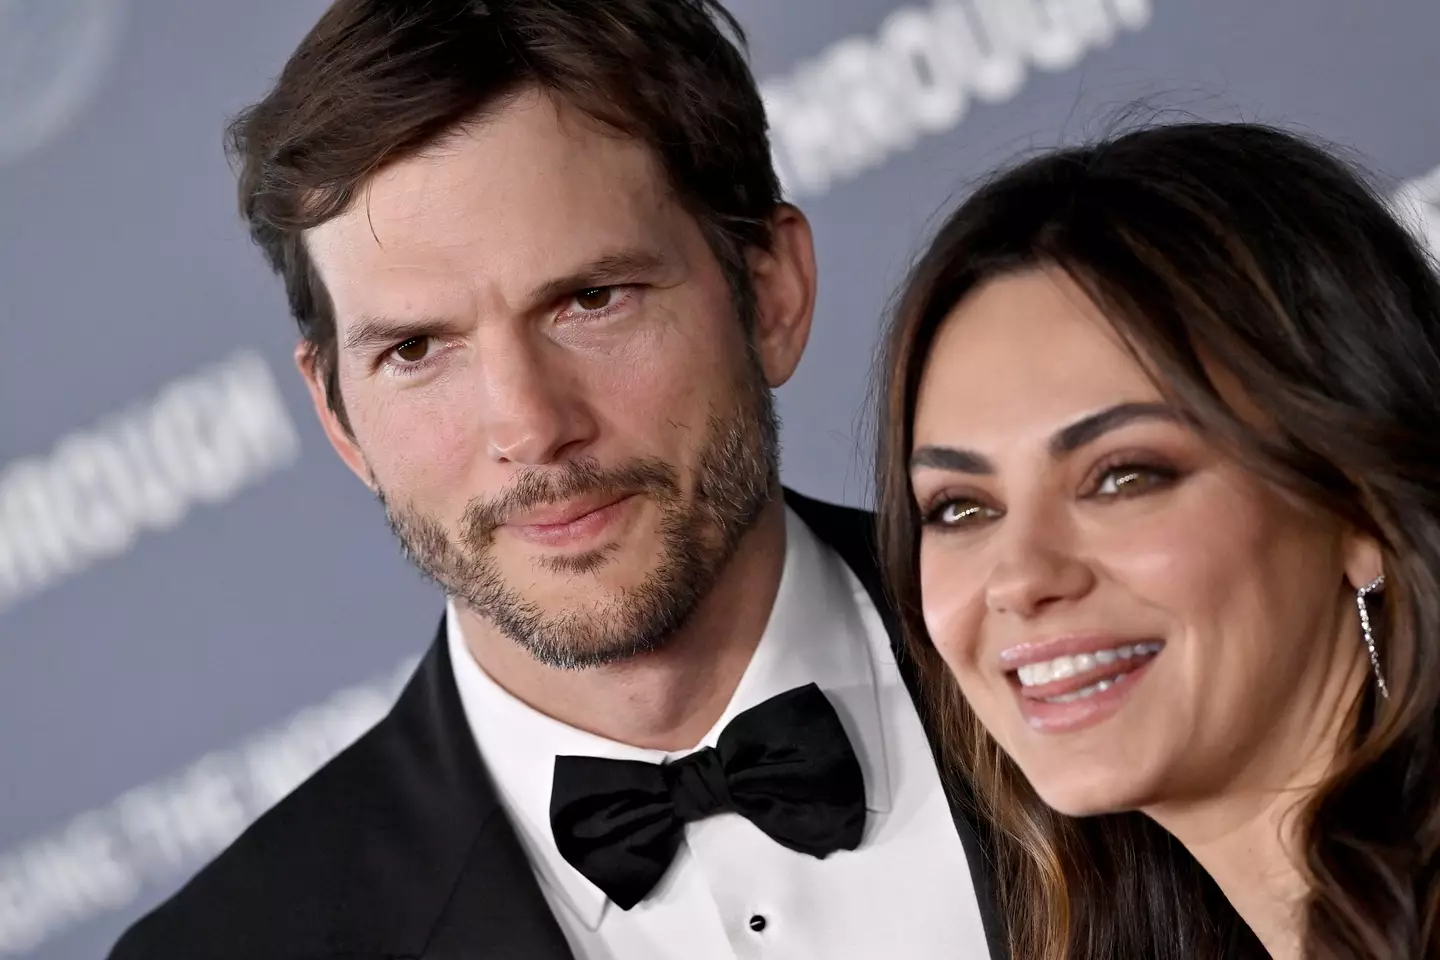 Kutcher and Kunis wrote character references for Masterson's sentencing.